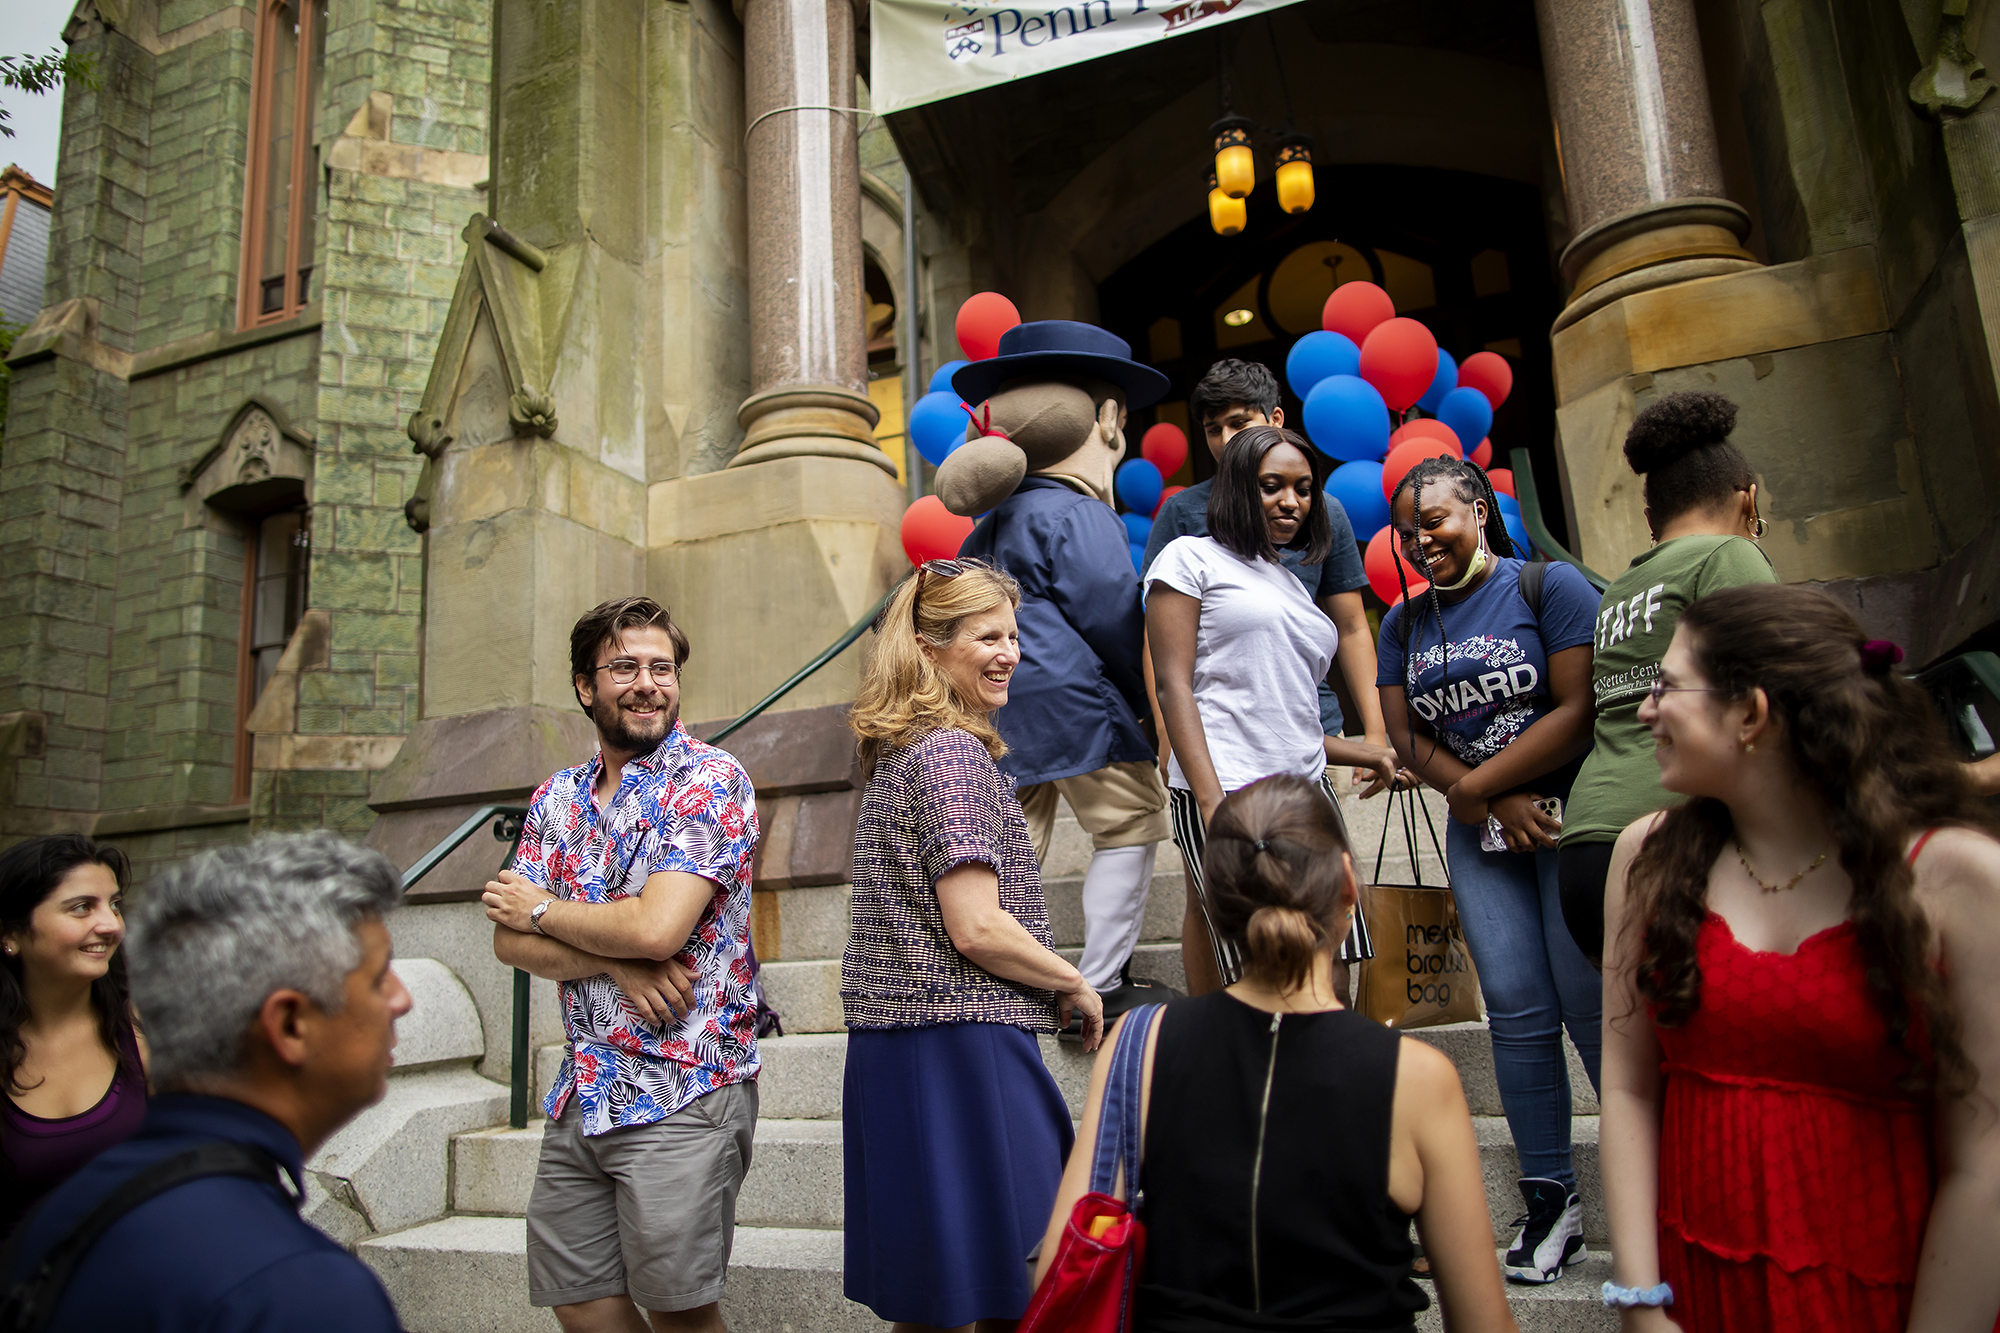 Penn President Liz Magill and a crowd of people on the steps of College Hall.